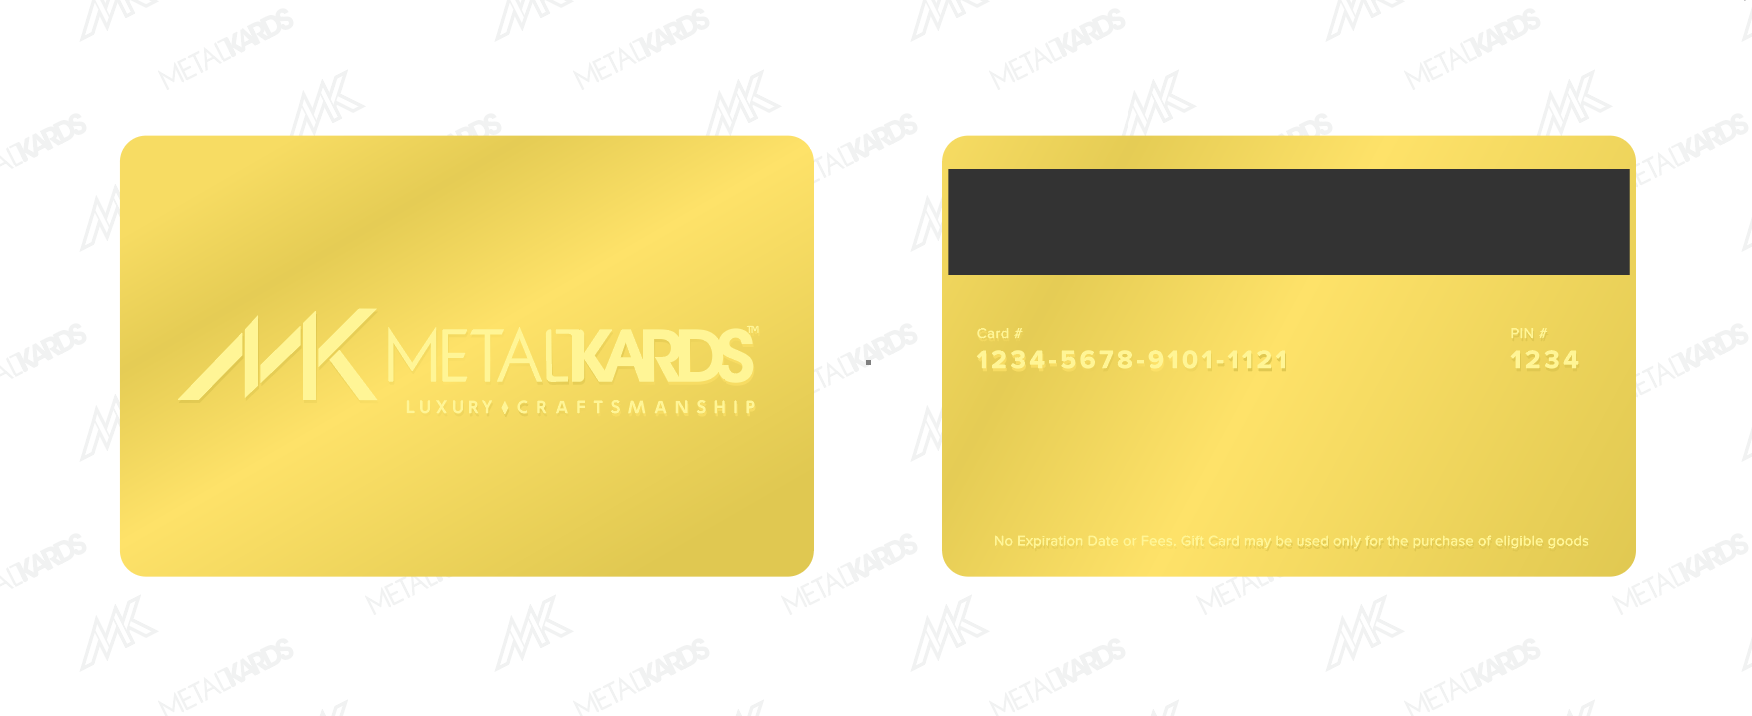 Gold on Gold Metal Cards